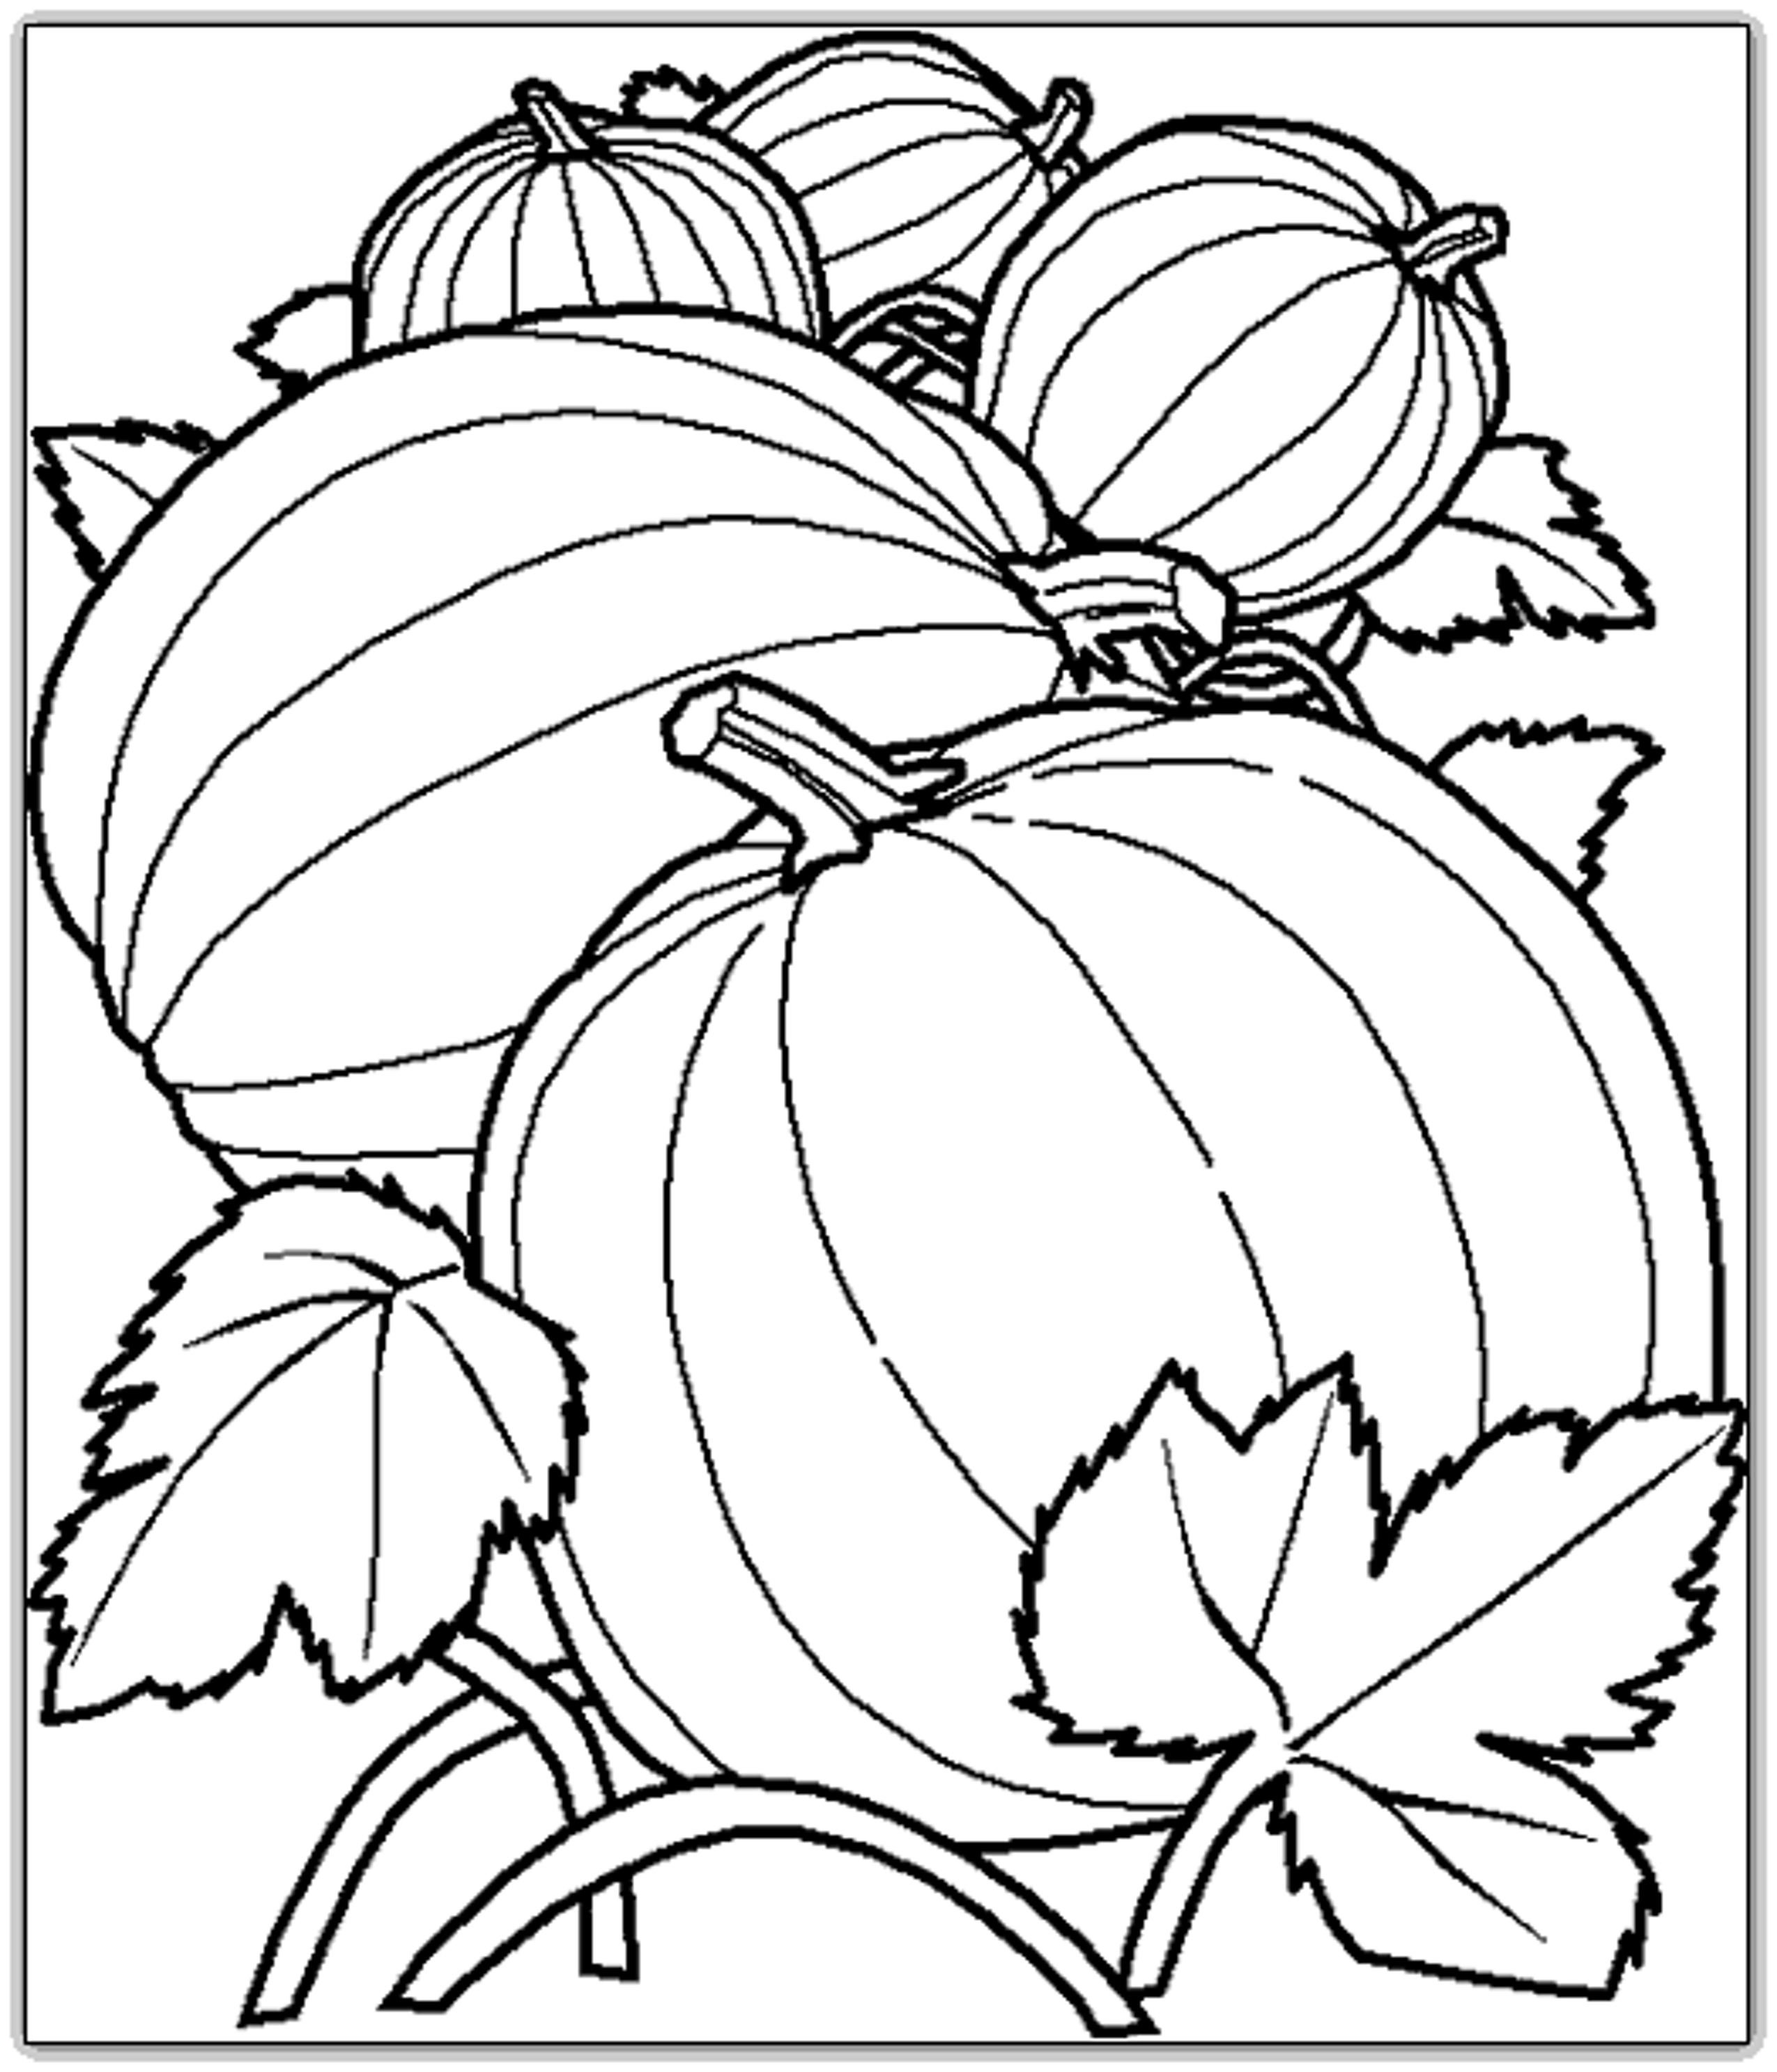 Free Printable Fall Harvest Coloring Pages at Free